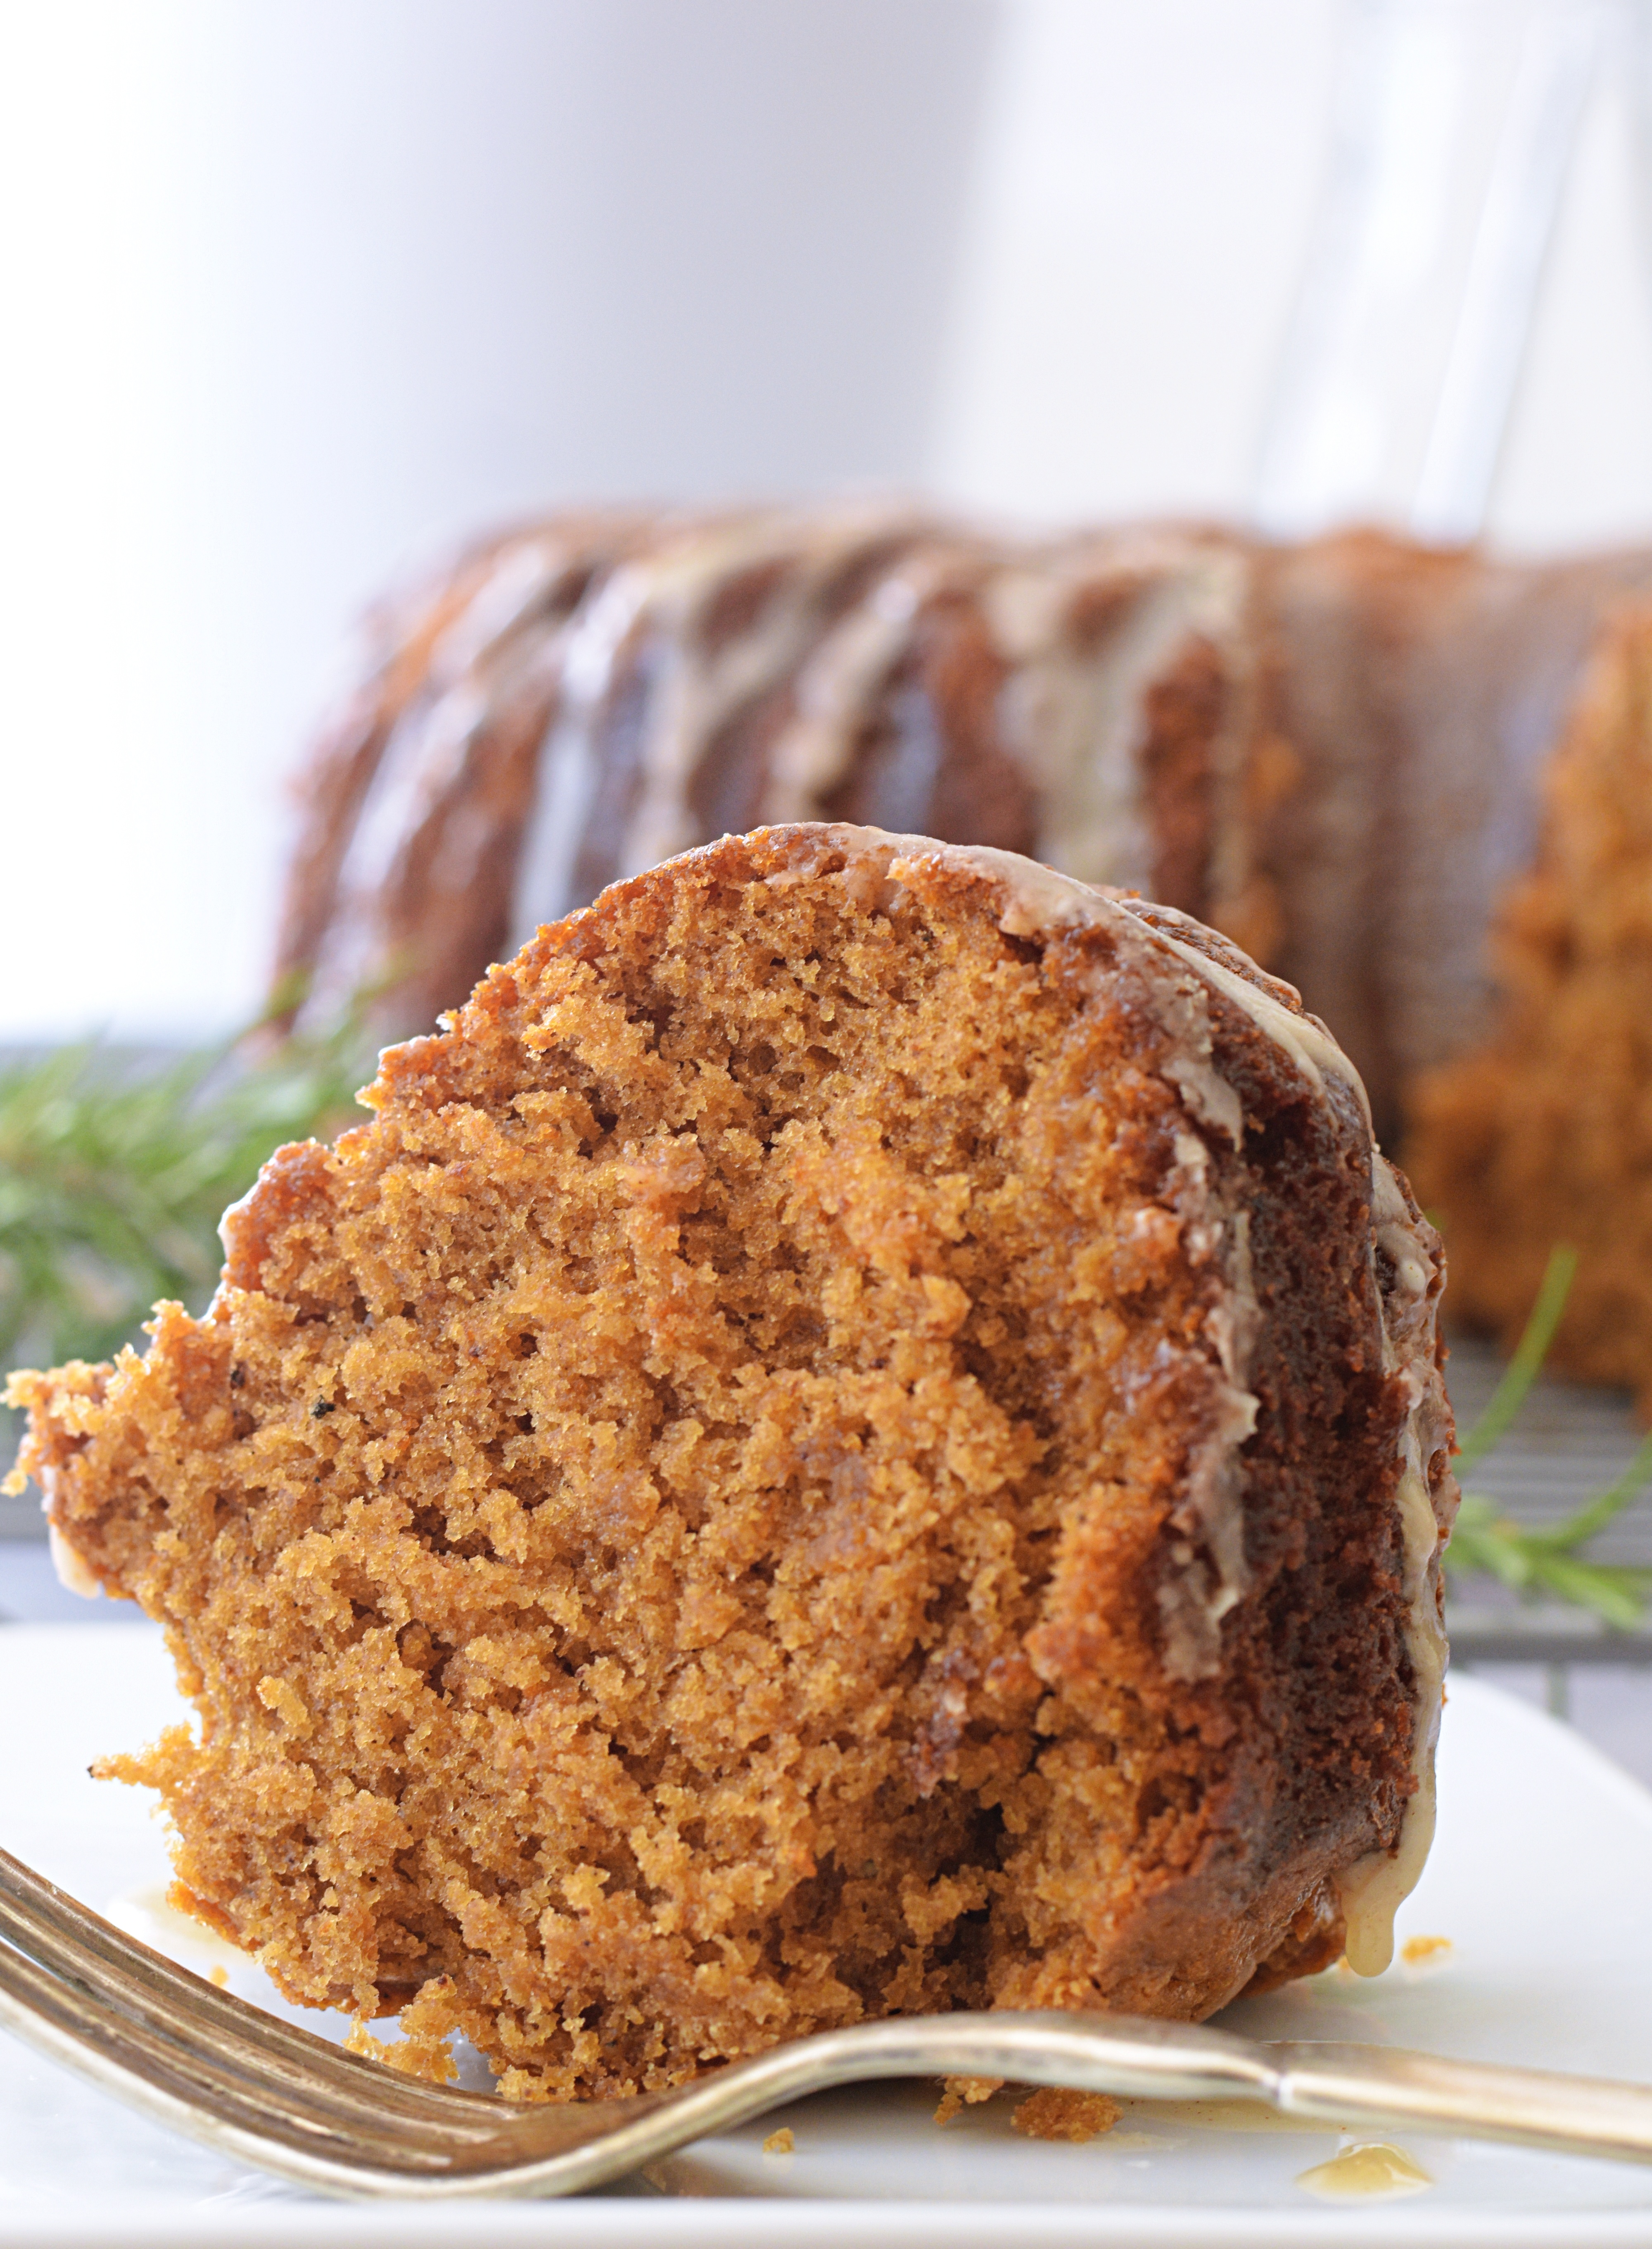 Gingerbread Bundt Cake - Confessions of a Baking Queen